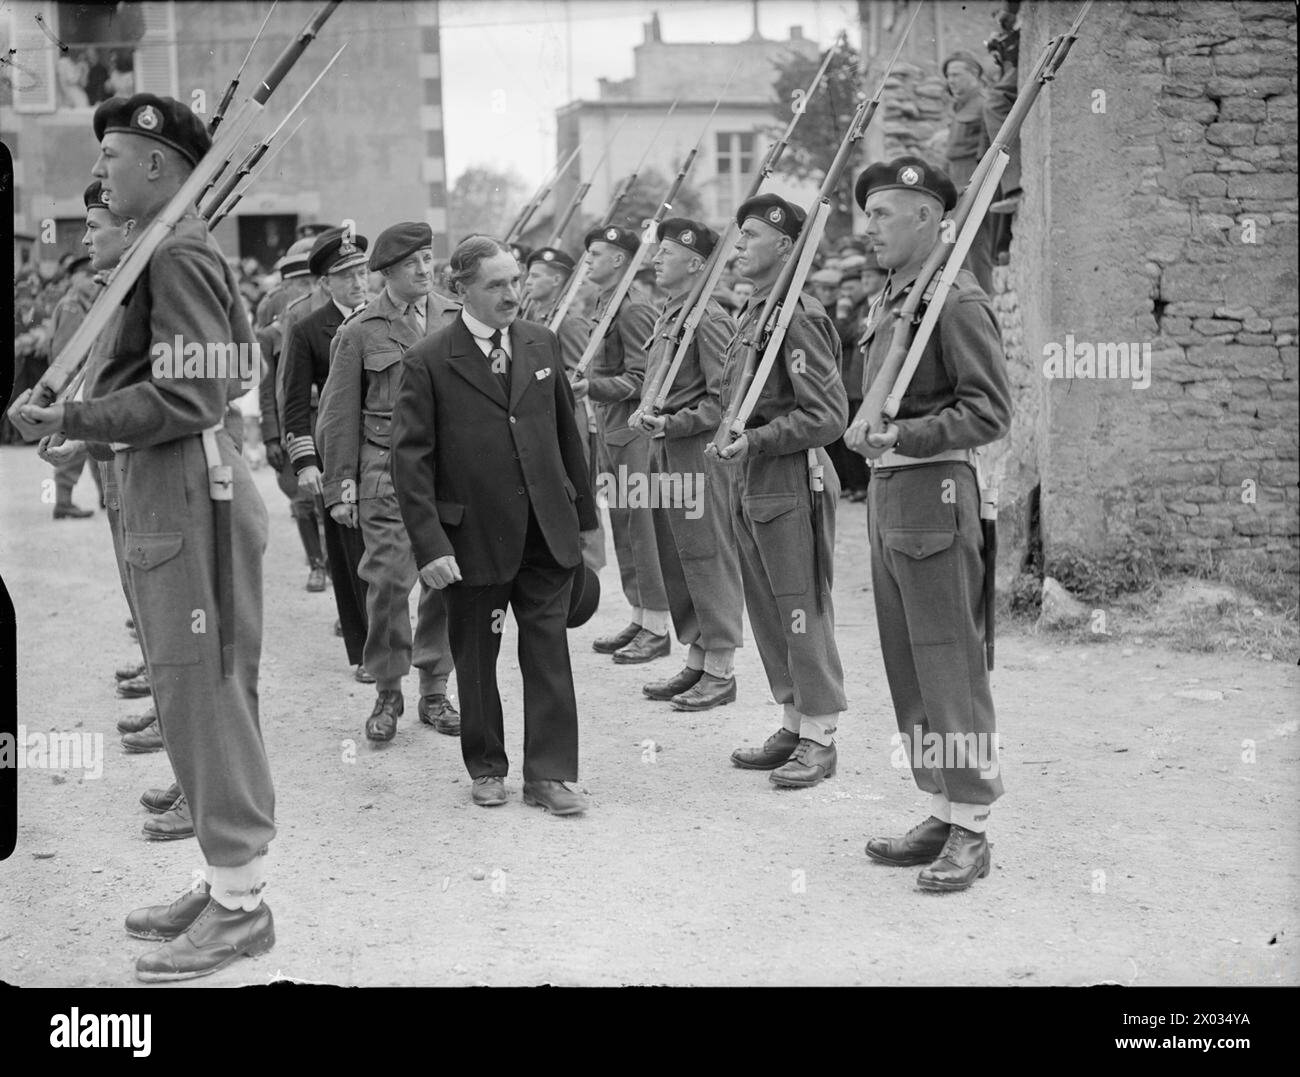 BASTILLE DAY IN ARROMANCHES. 14 JULY 1944, REPRESENTATIVES OF THE ROYAL NAVY, BRITISH ARMY, AND AIR FORCE MET THE CURE AND THE MAYOR AT A CEREMONY FOR WHICH THE ROYAL MARINES PROVIDED A GUARD OF HONOUR. - M Paris, the Mayor of Arromanches, inspecting the Royal Marines Guard of Honour. He is followed by Major J P Kelly, DSM, RM; and Capt H Hickling, DSO, RN, NOIC Arromanches Stock Photo